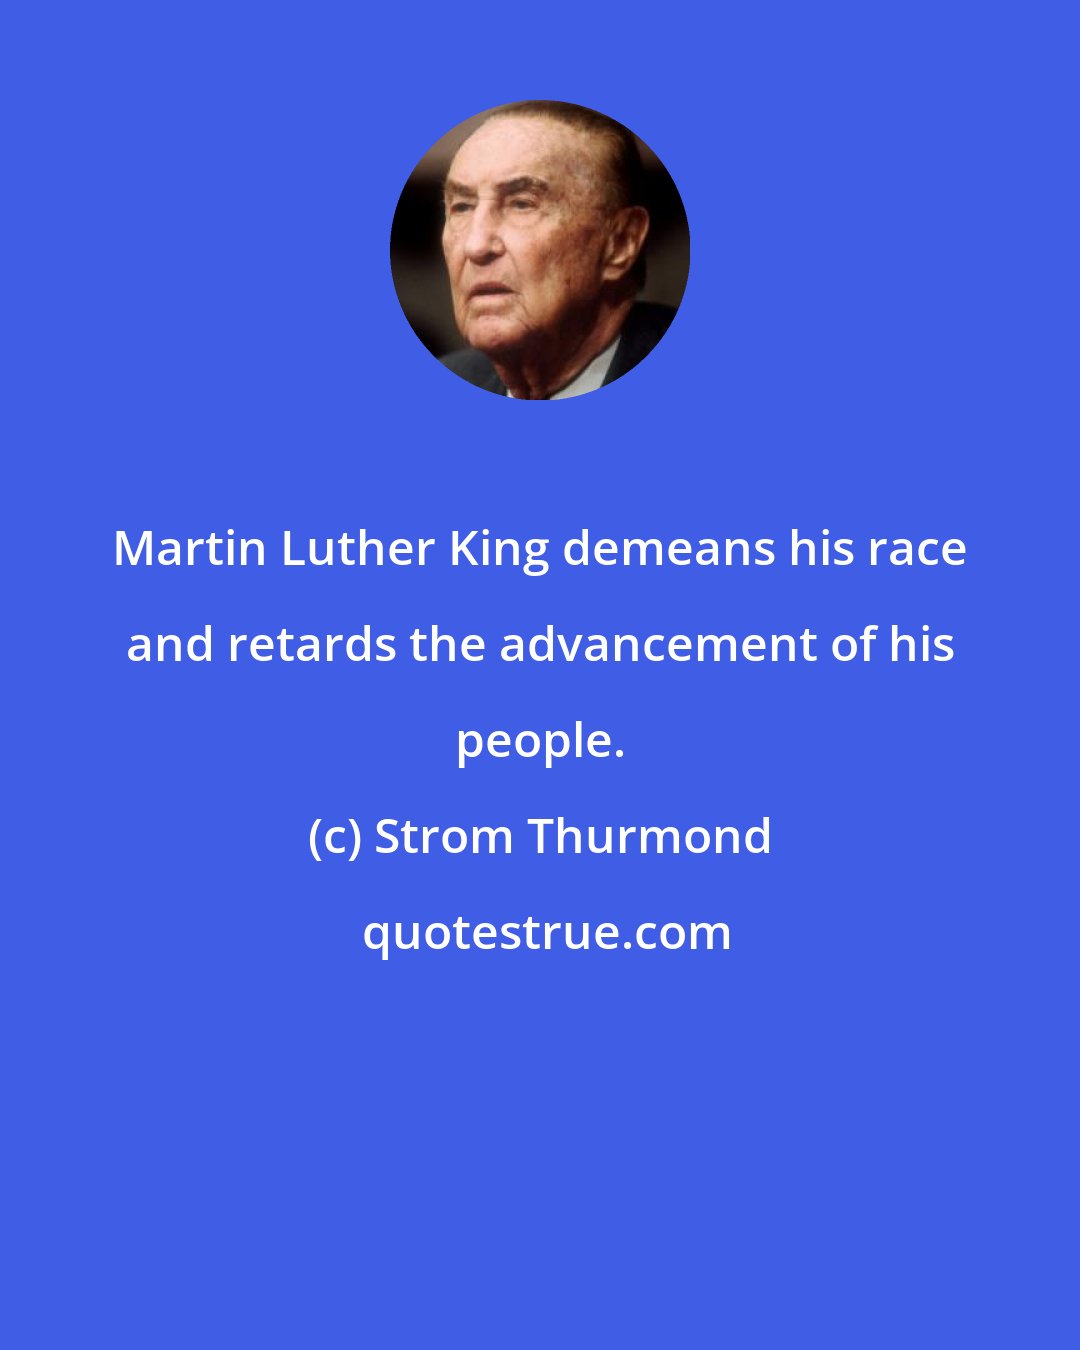 Strom Thurmond: Martin Luther King demeans his race and retards the advancement of his people.